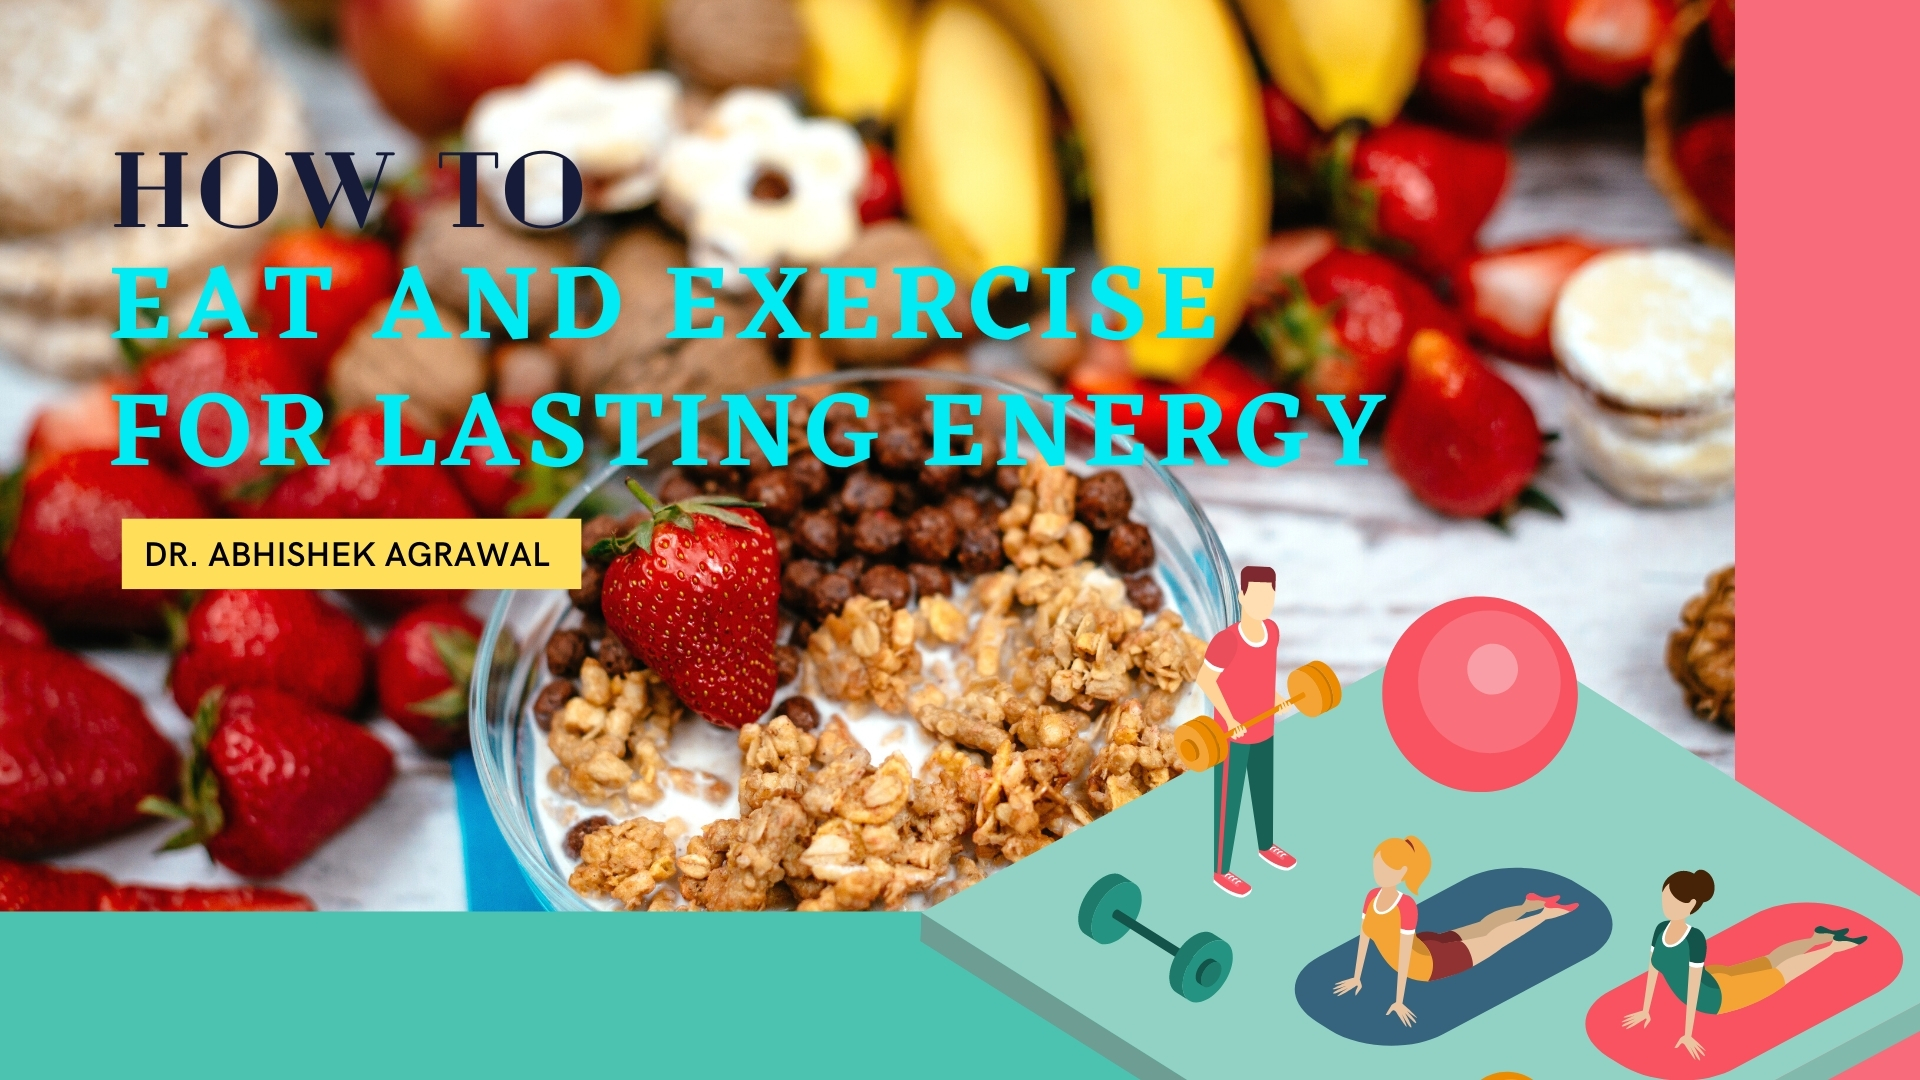 Eat and Exercise for Lasting Energy